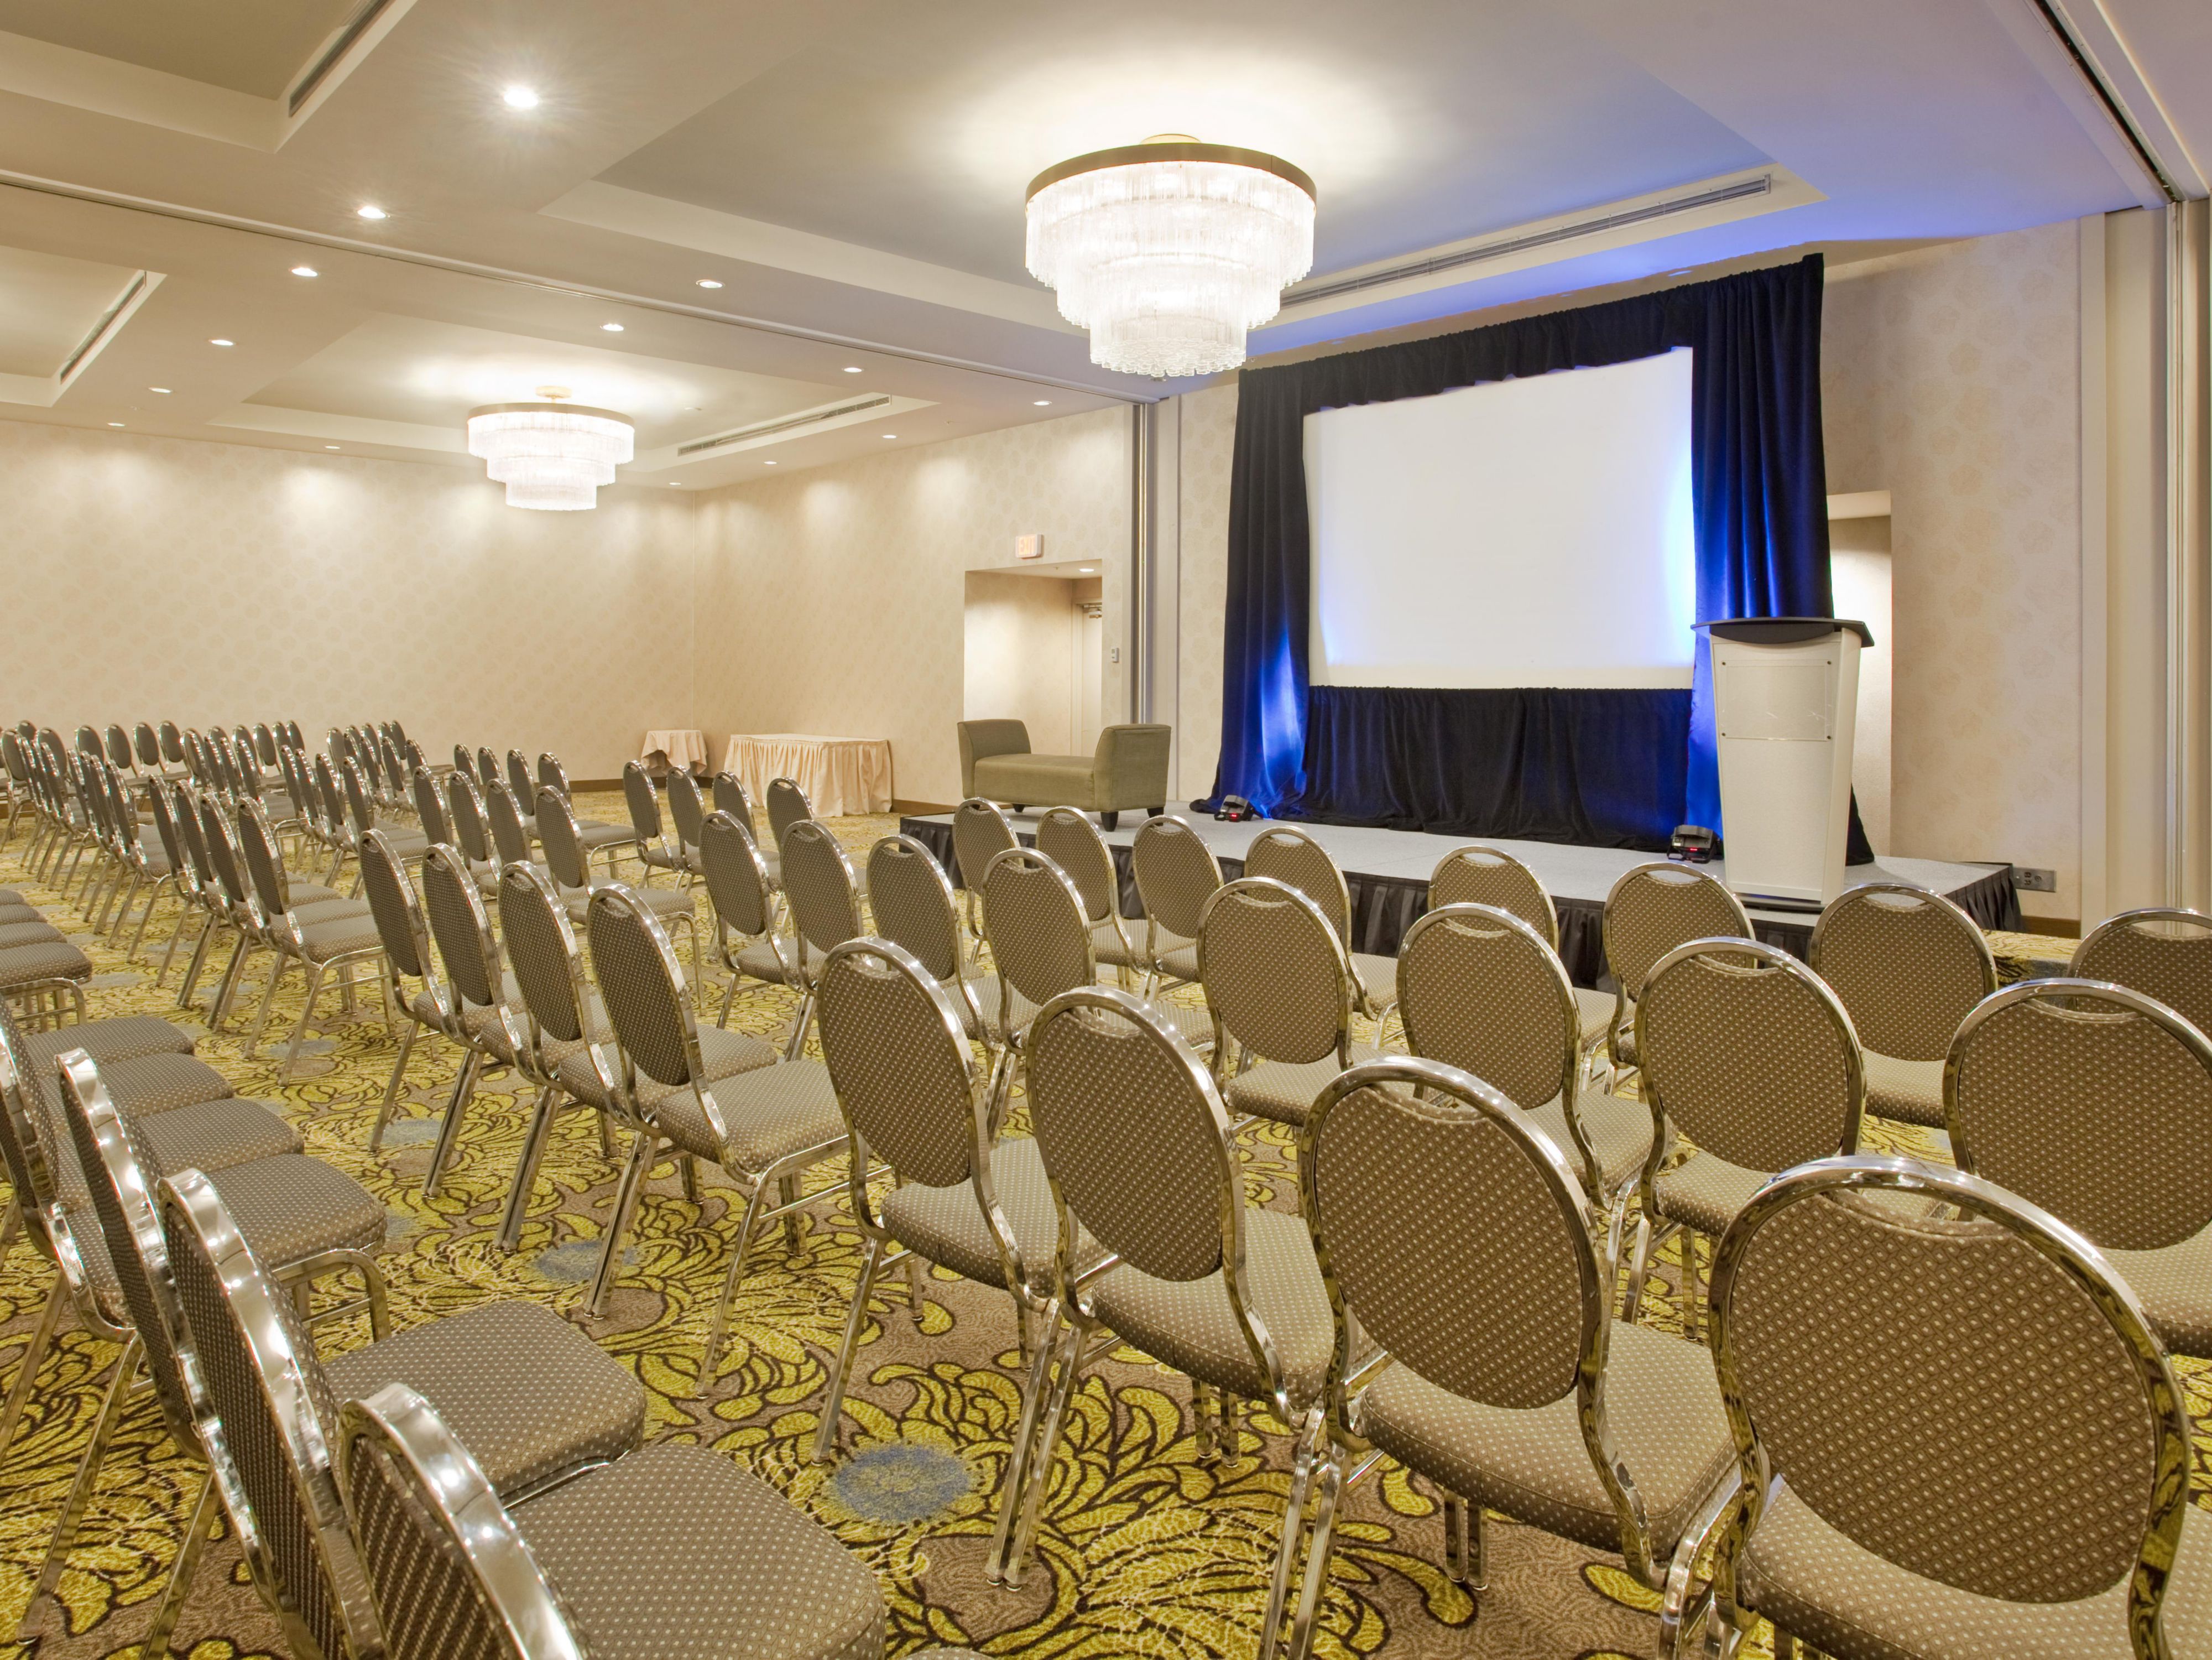 More than 5,600 square feet of flexible space awaits. From corporate meetings, social events, weddings and everything in between, we have the space and the knowledge to help you plan your next big (or small) event. 